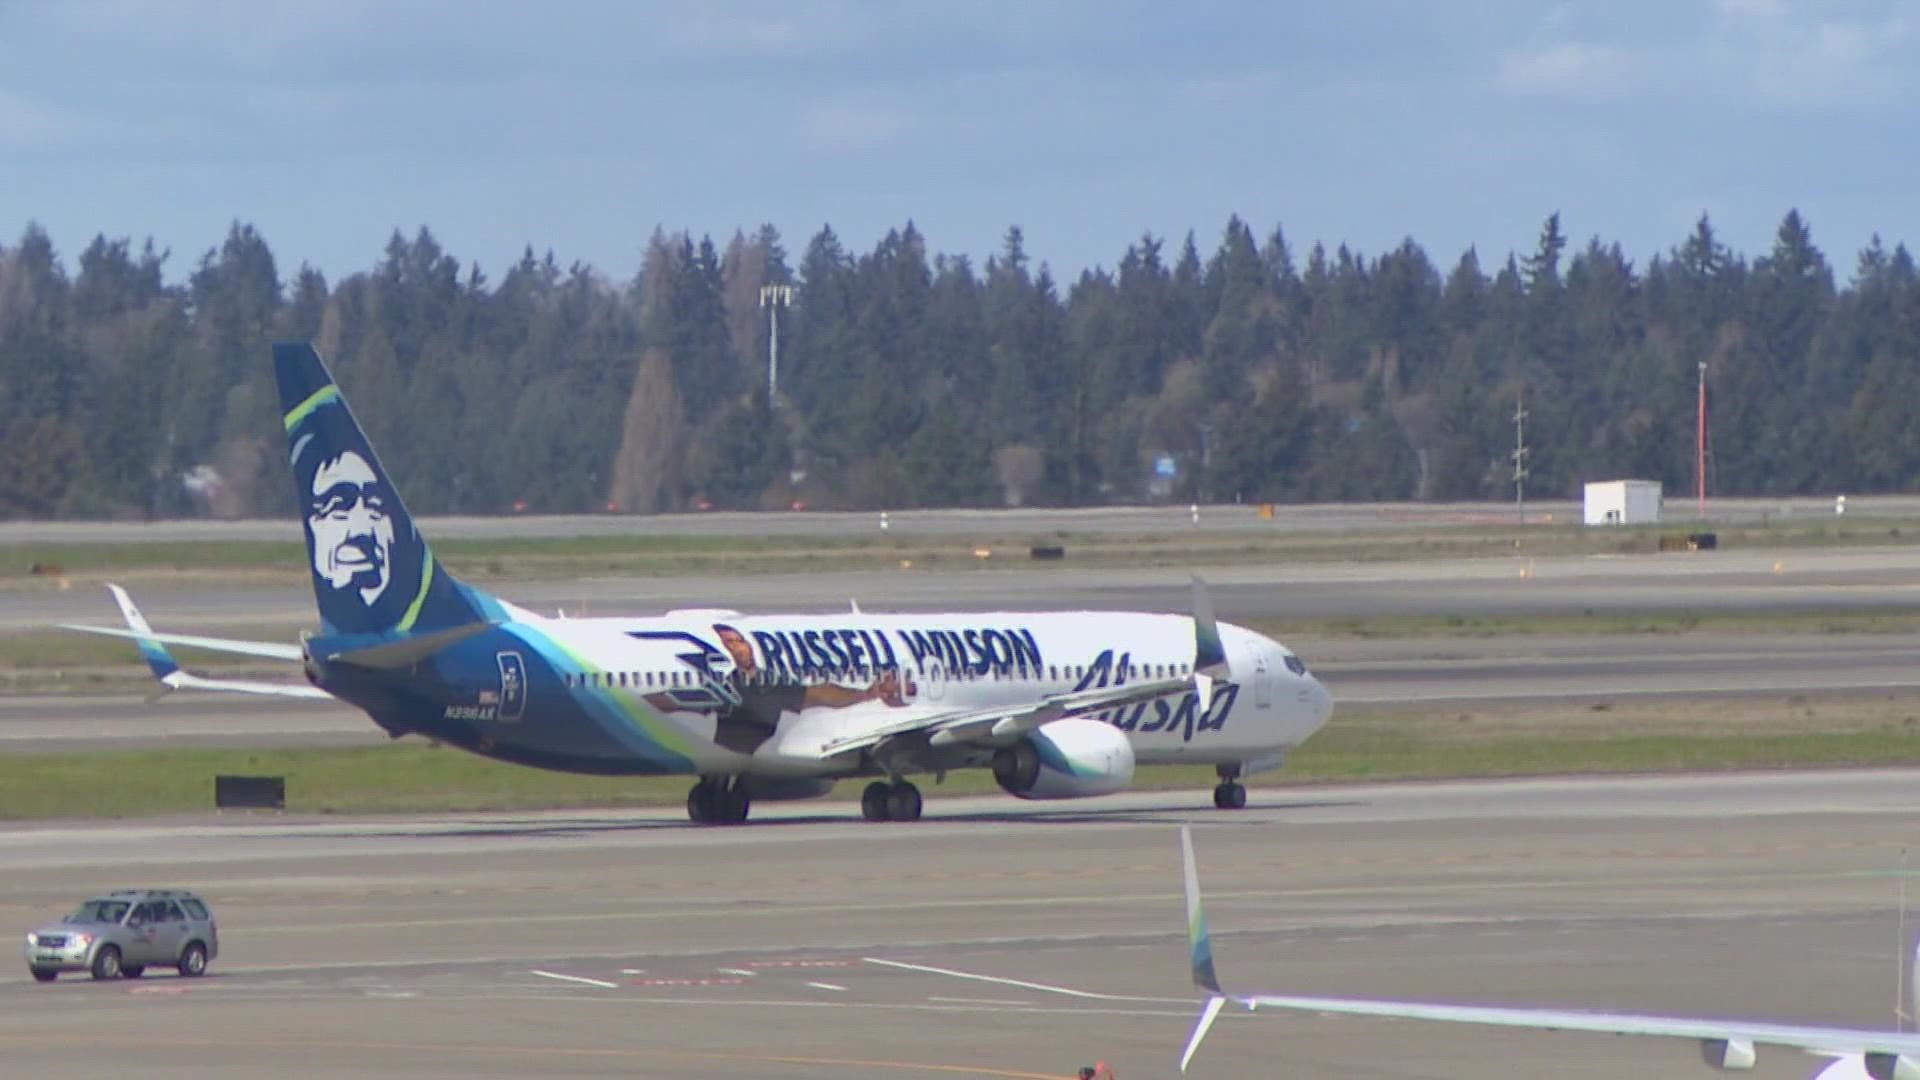 A number of travelers had their plans altered after a significant number of Alaska Airlines flights were canceled or delayed.